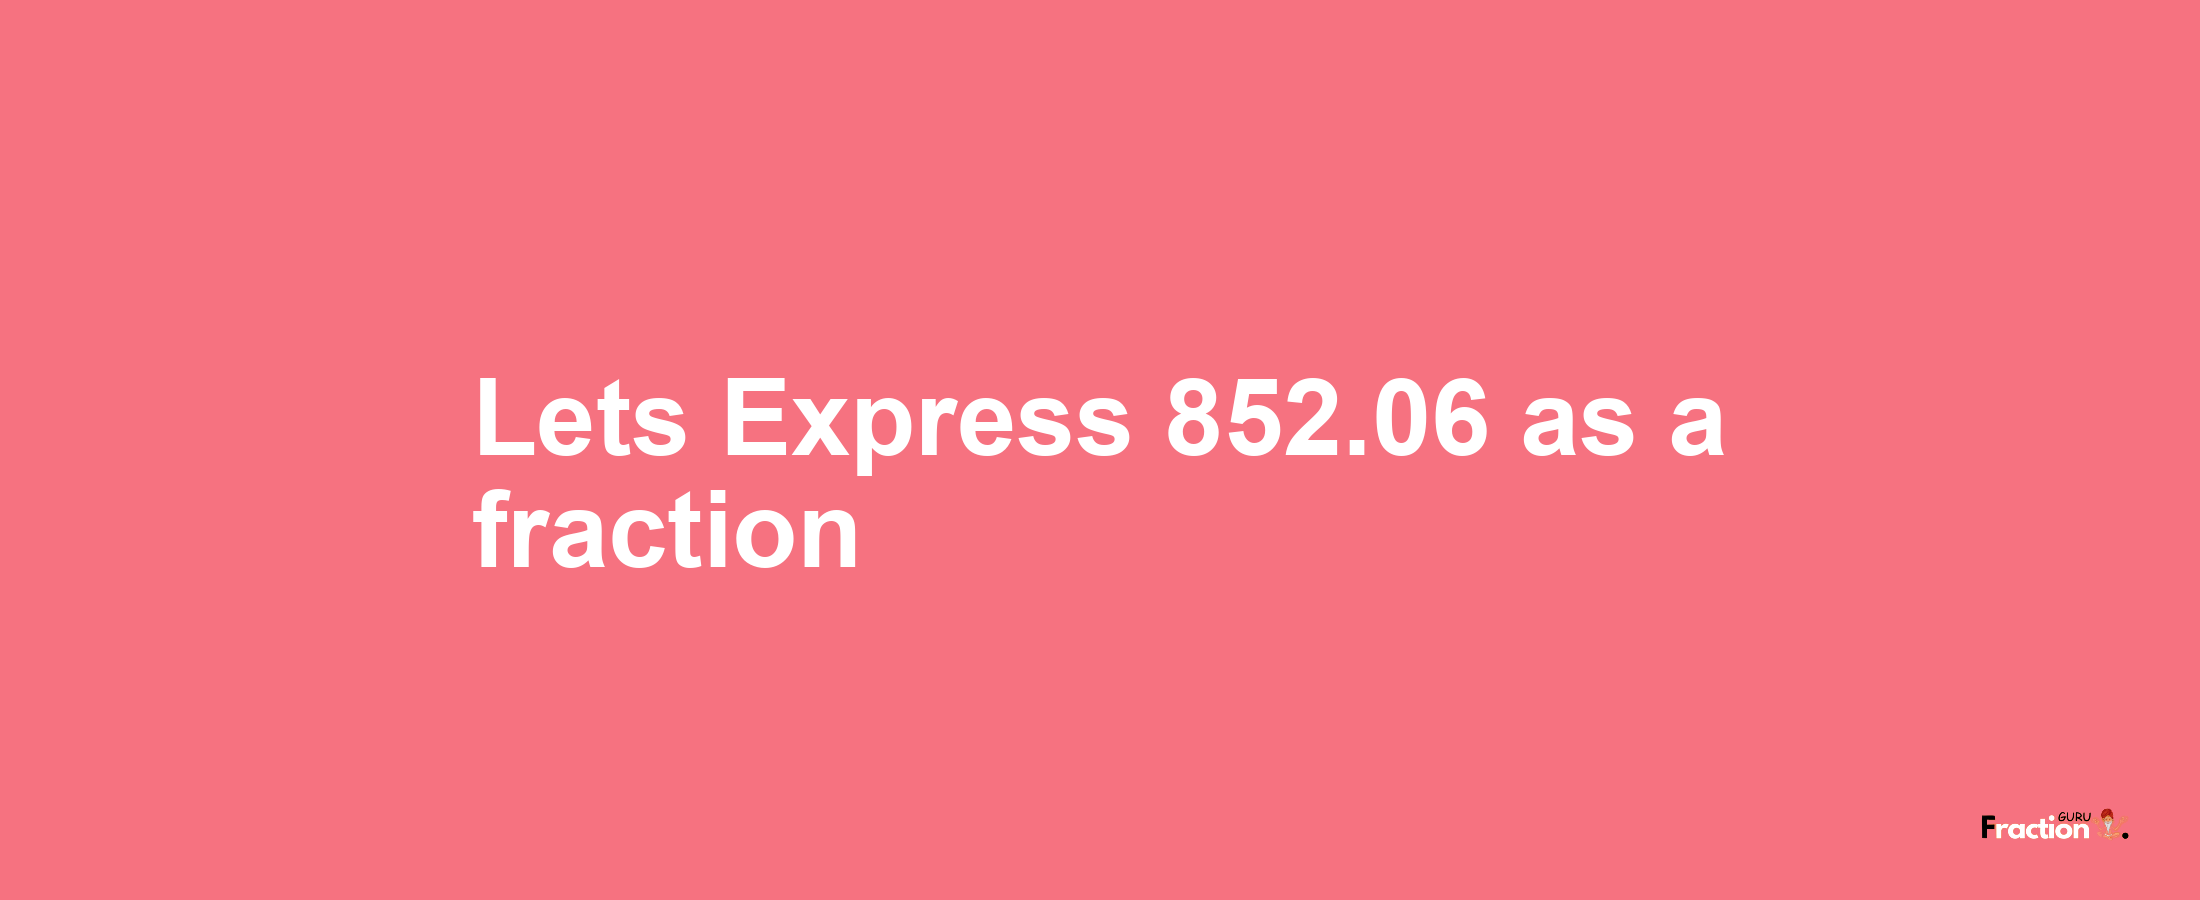 Lets Express 852.06 as afraction